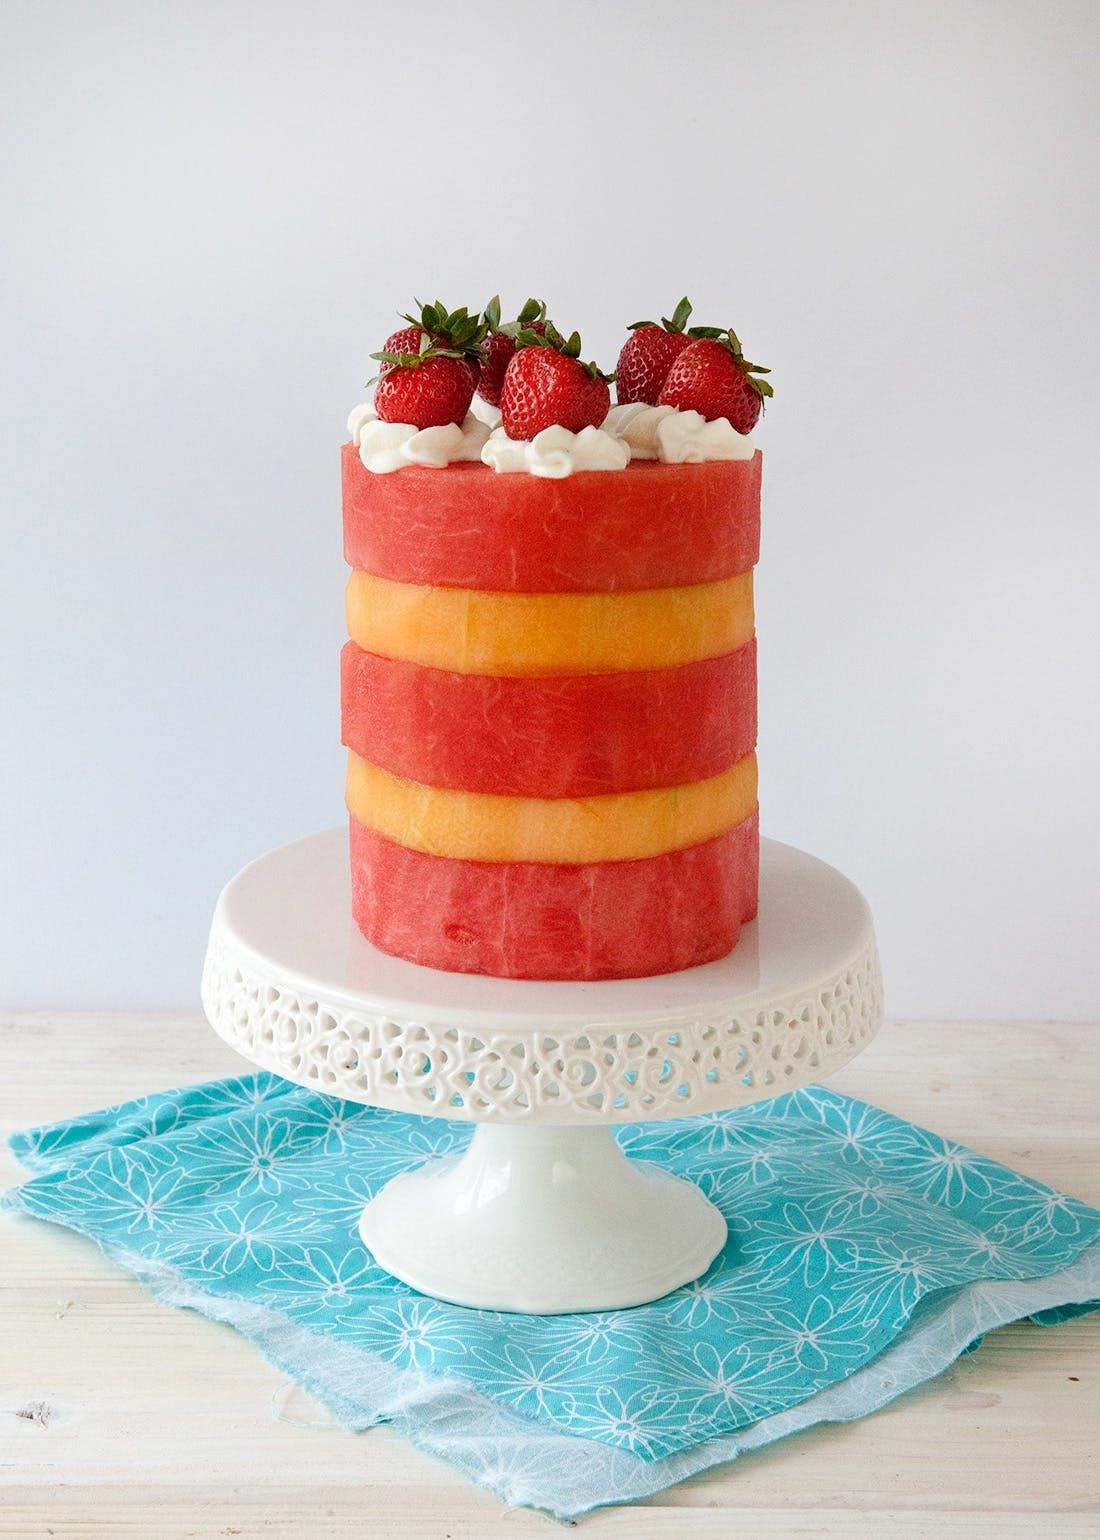 Eco-Vegan Gal - Wow - I can't wait to try this brilliant No Bake Watermelon  Cake recipe!! It looks really easy, super fresh, can be made sugar-free, raw  and vegan #paleo too.